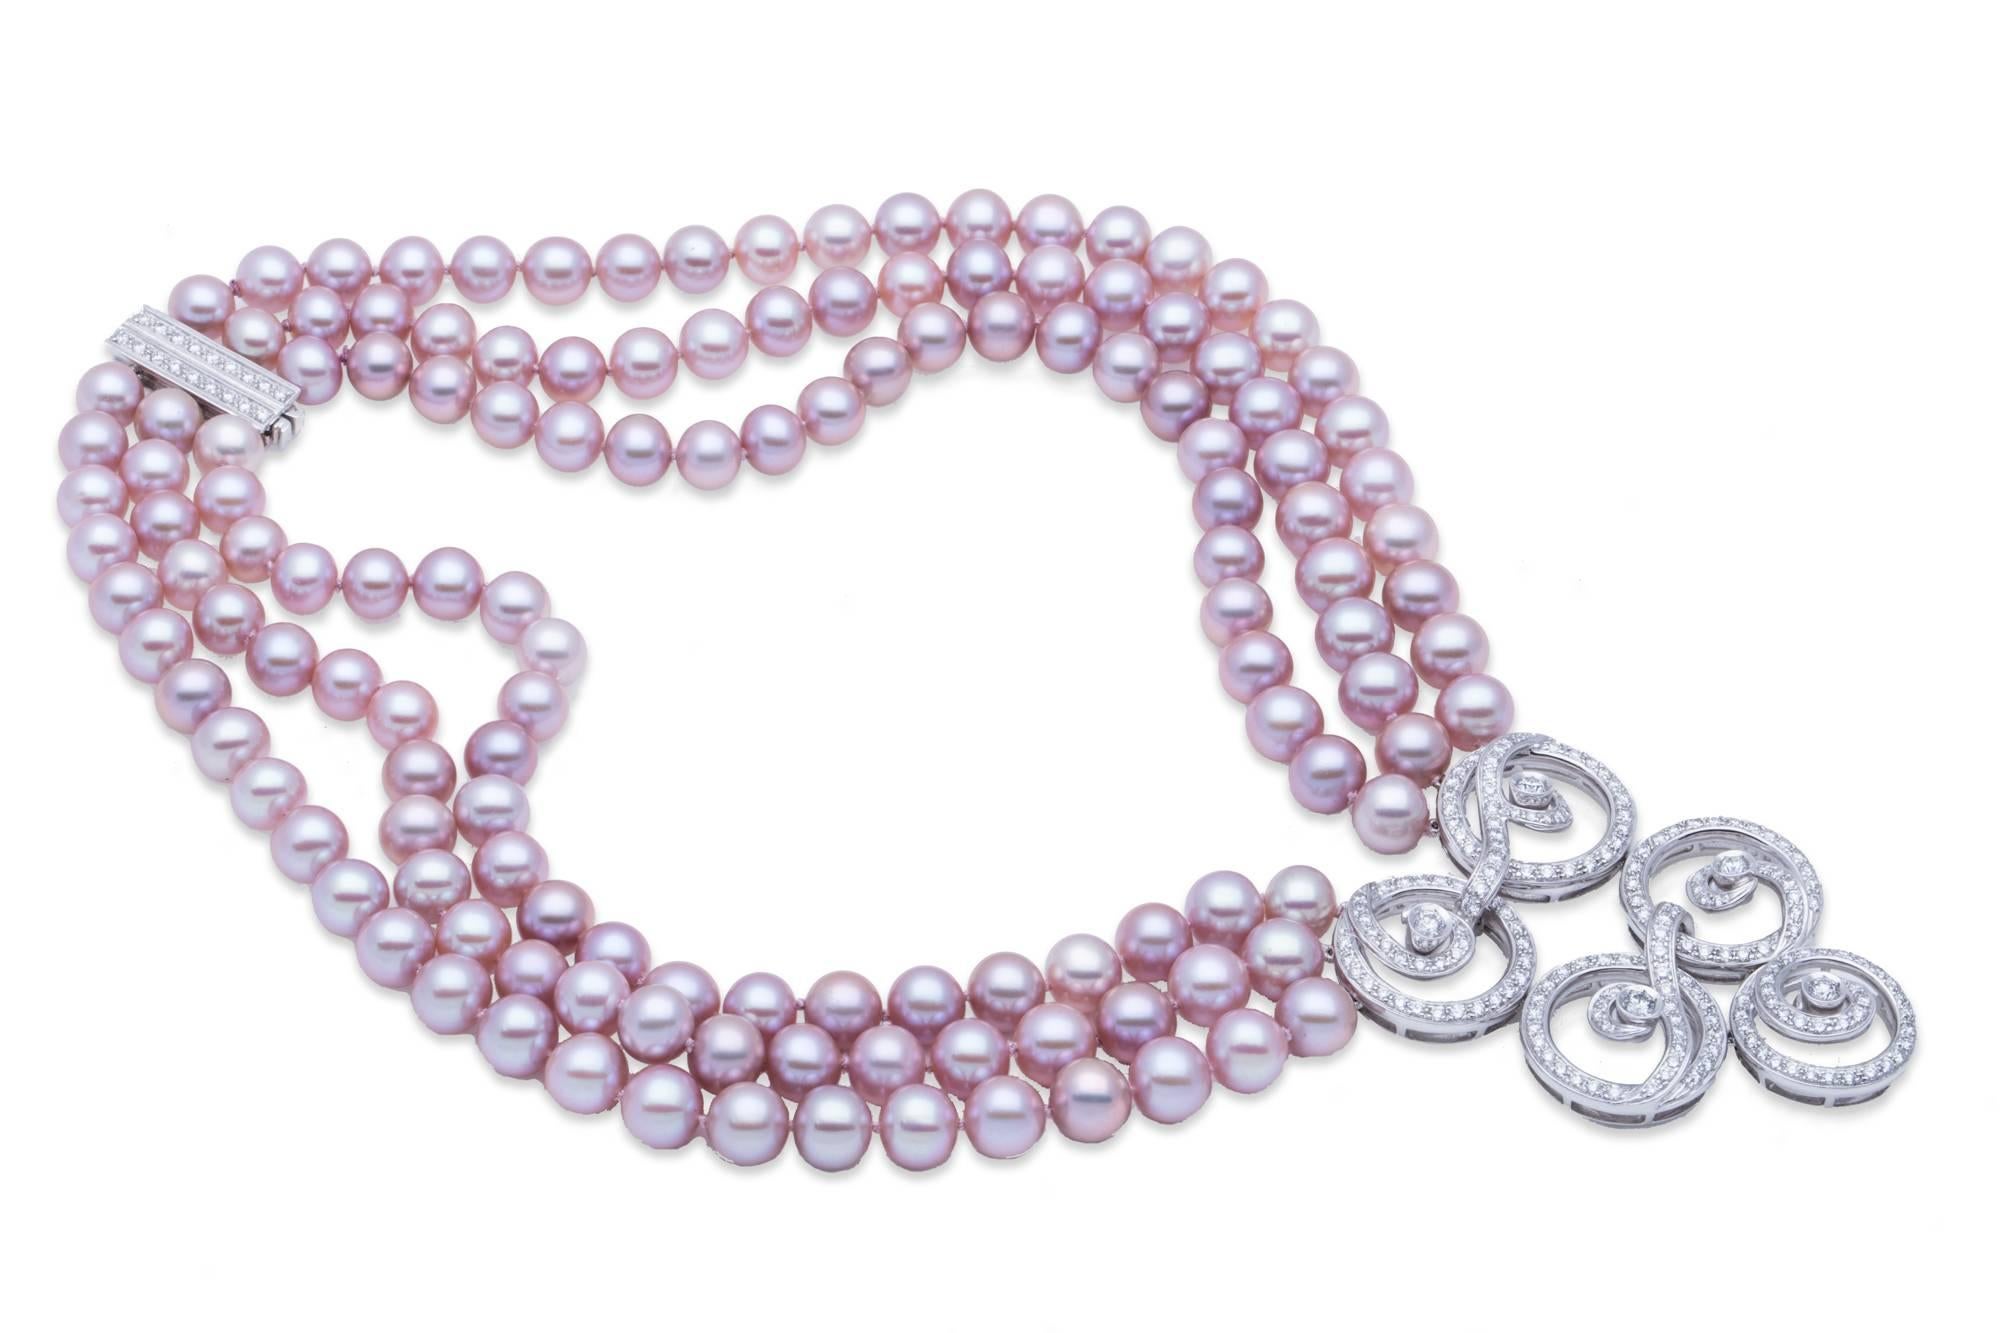 Asprey of London Pink Pearl Necklace with 18K White Gold Diamond Swirl Pendant and 18K White Gold Diamond Clasp. Three Rows (140 pcs) 8.00mm-8.50mm Pink Pearls, Total Diamond Weight: 5.00ct, Diamond Pendant Dimensions: L 2.38